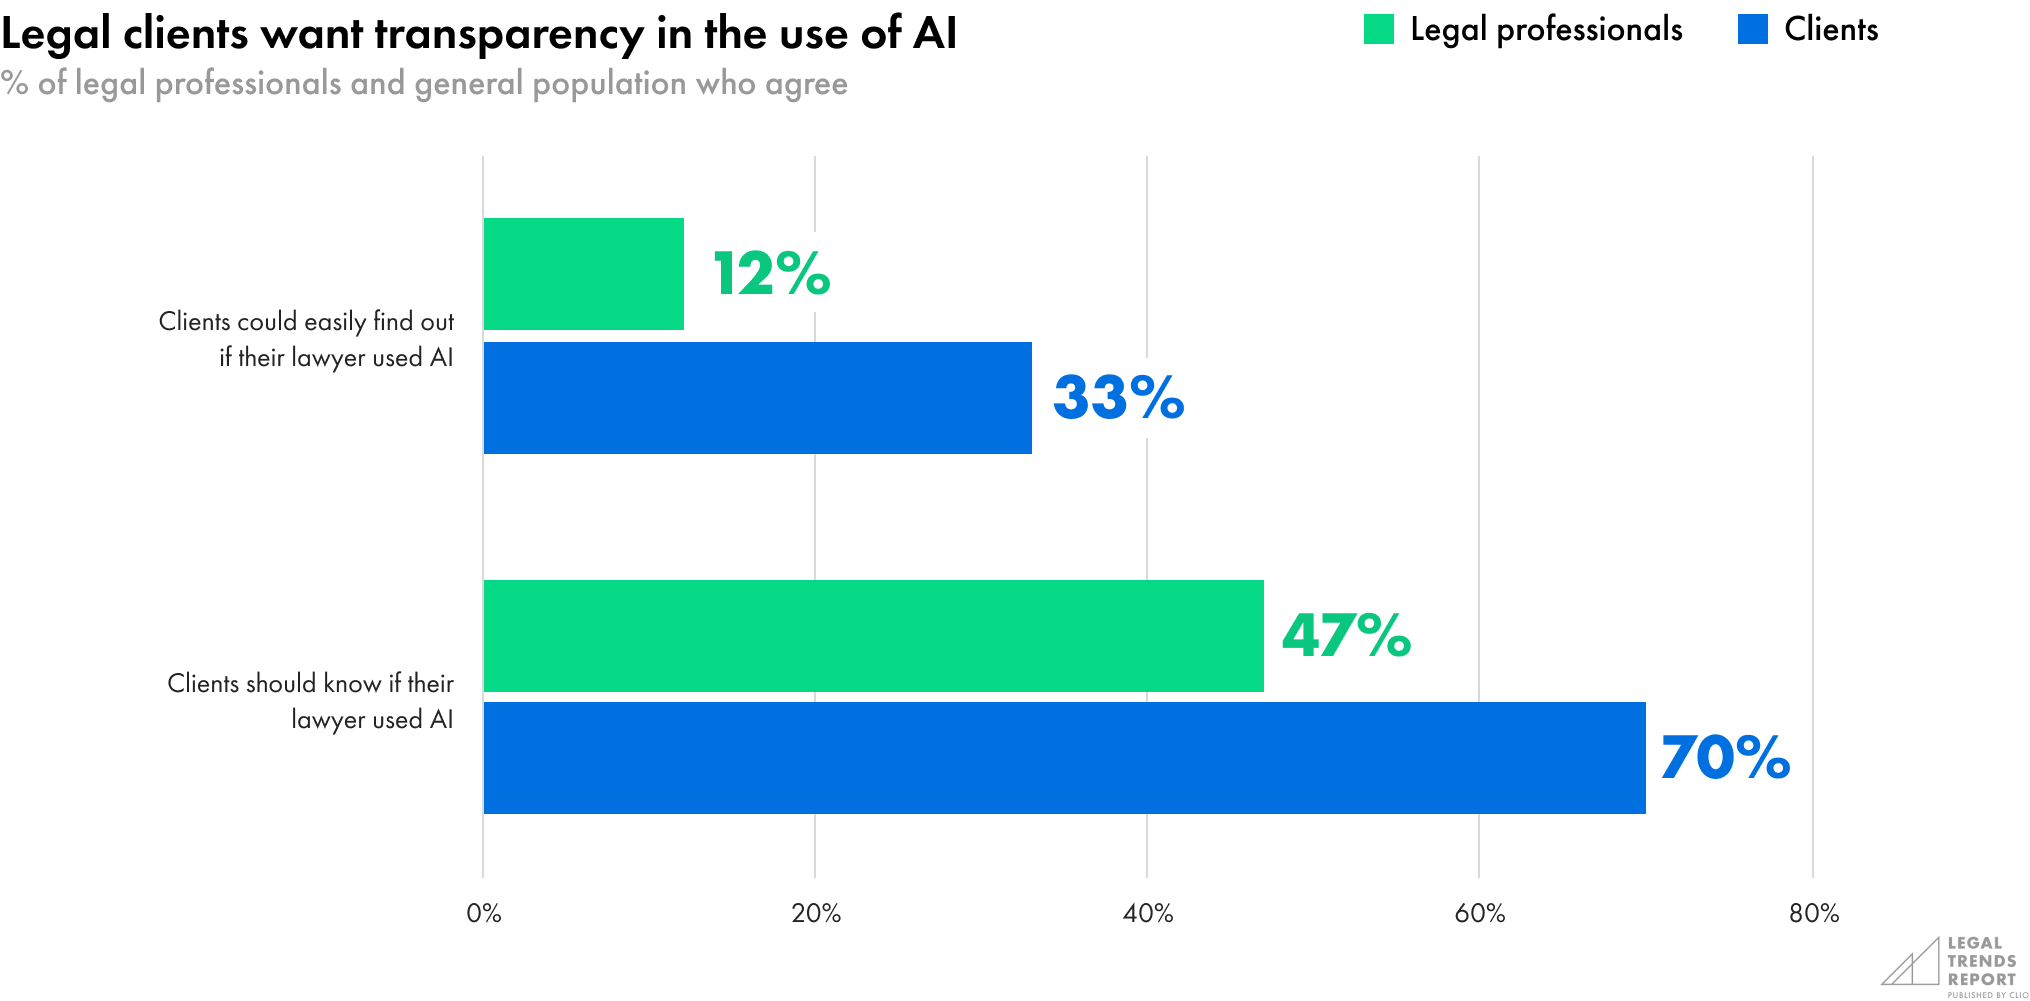 Legal clients want transparency in the use of AI